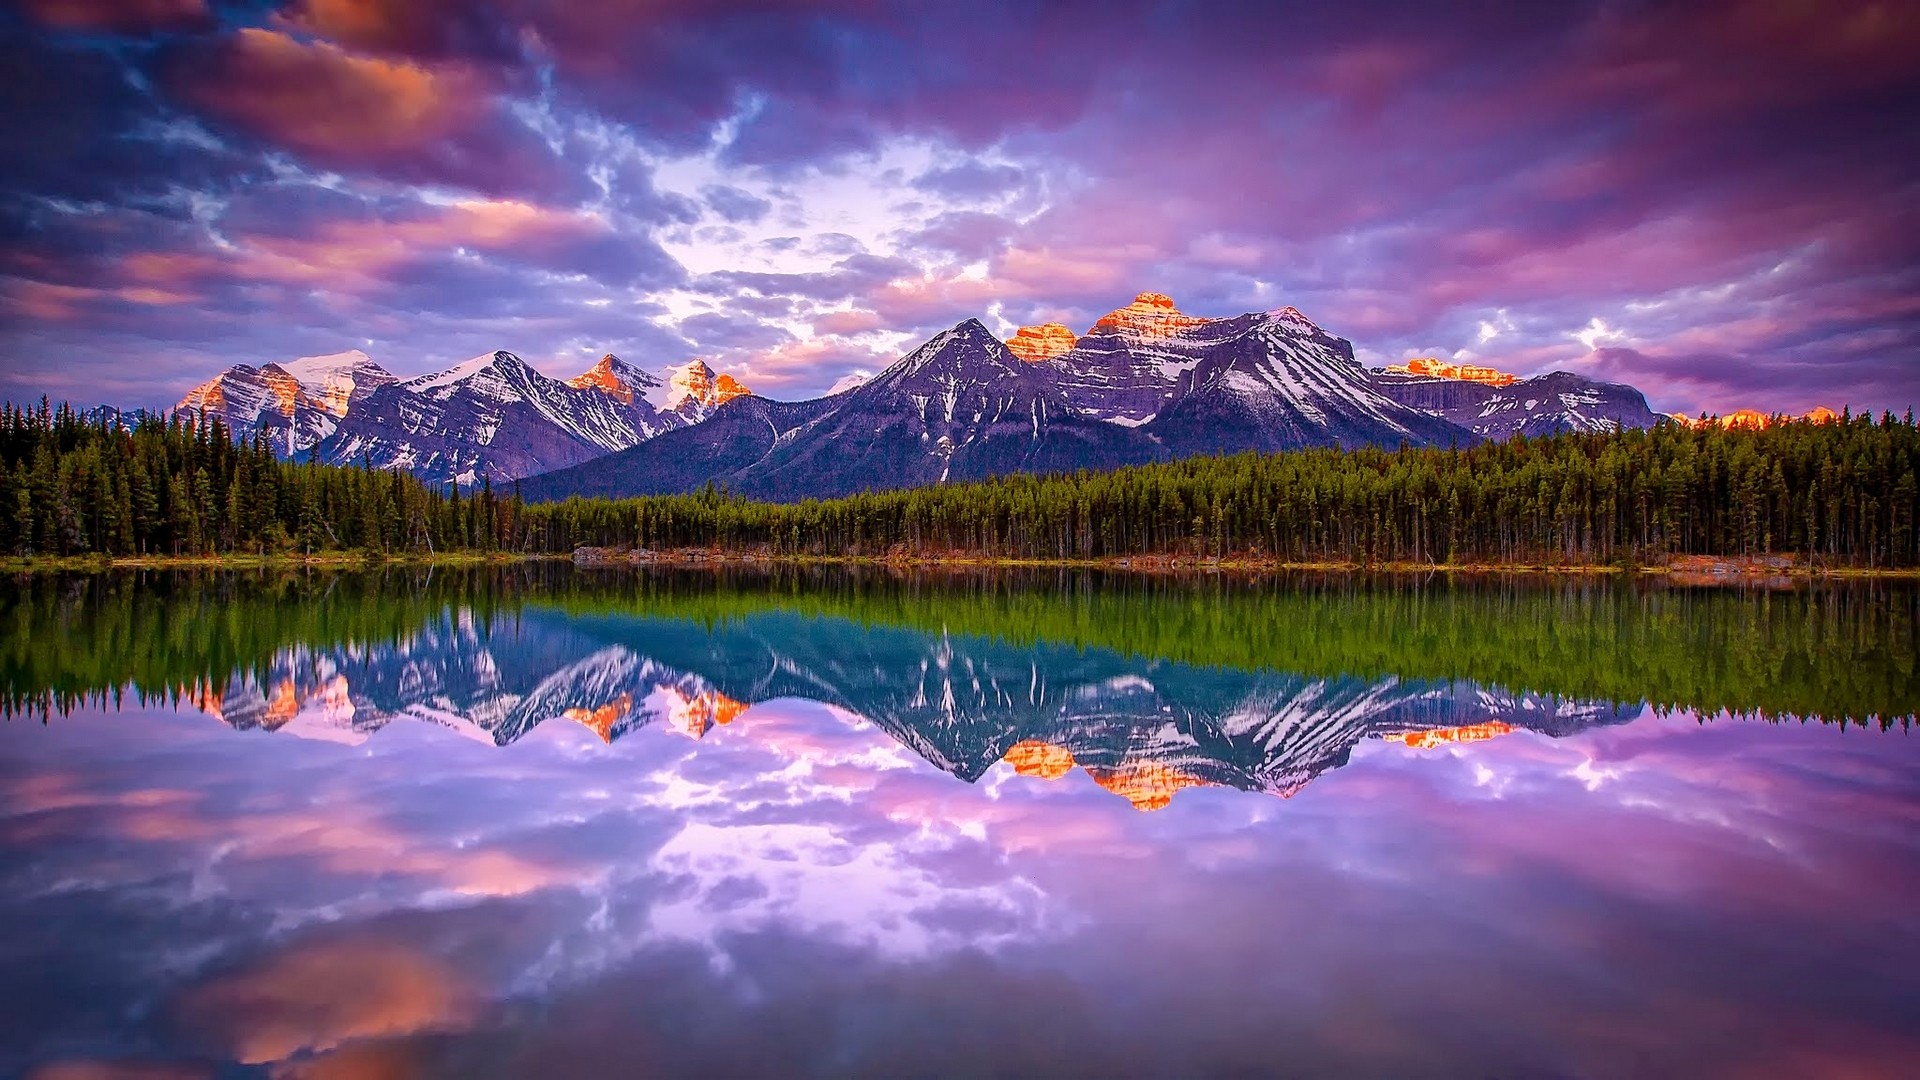 General 1920x1080 lake mountains forest nature landscape Canada snowy peak clouds reflection water calm